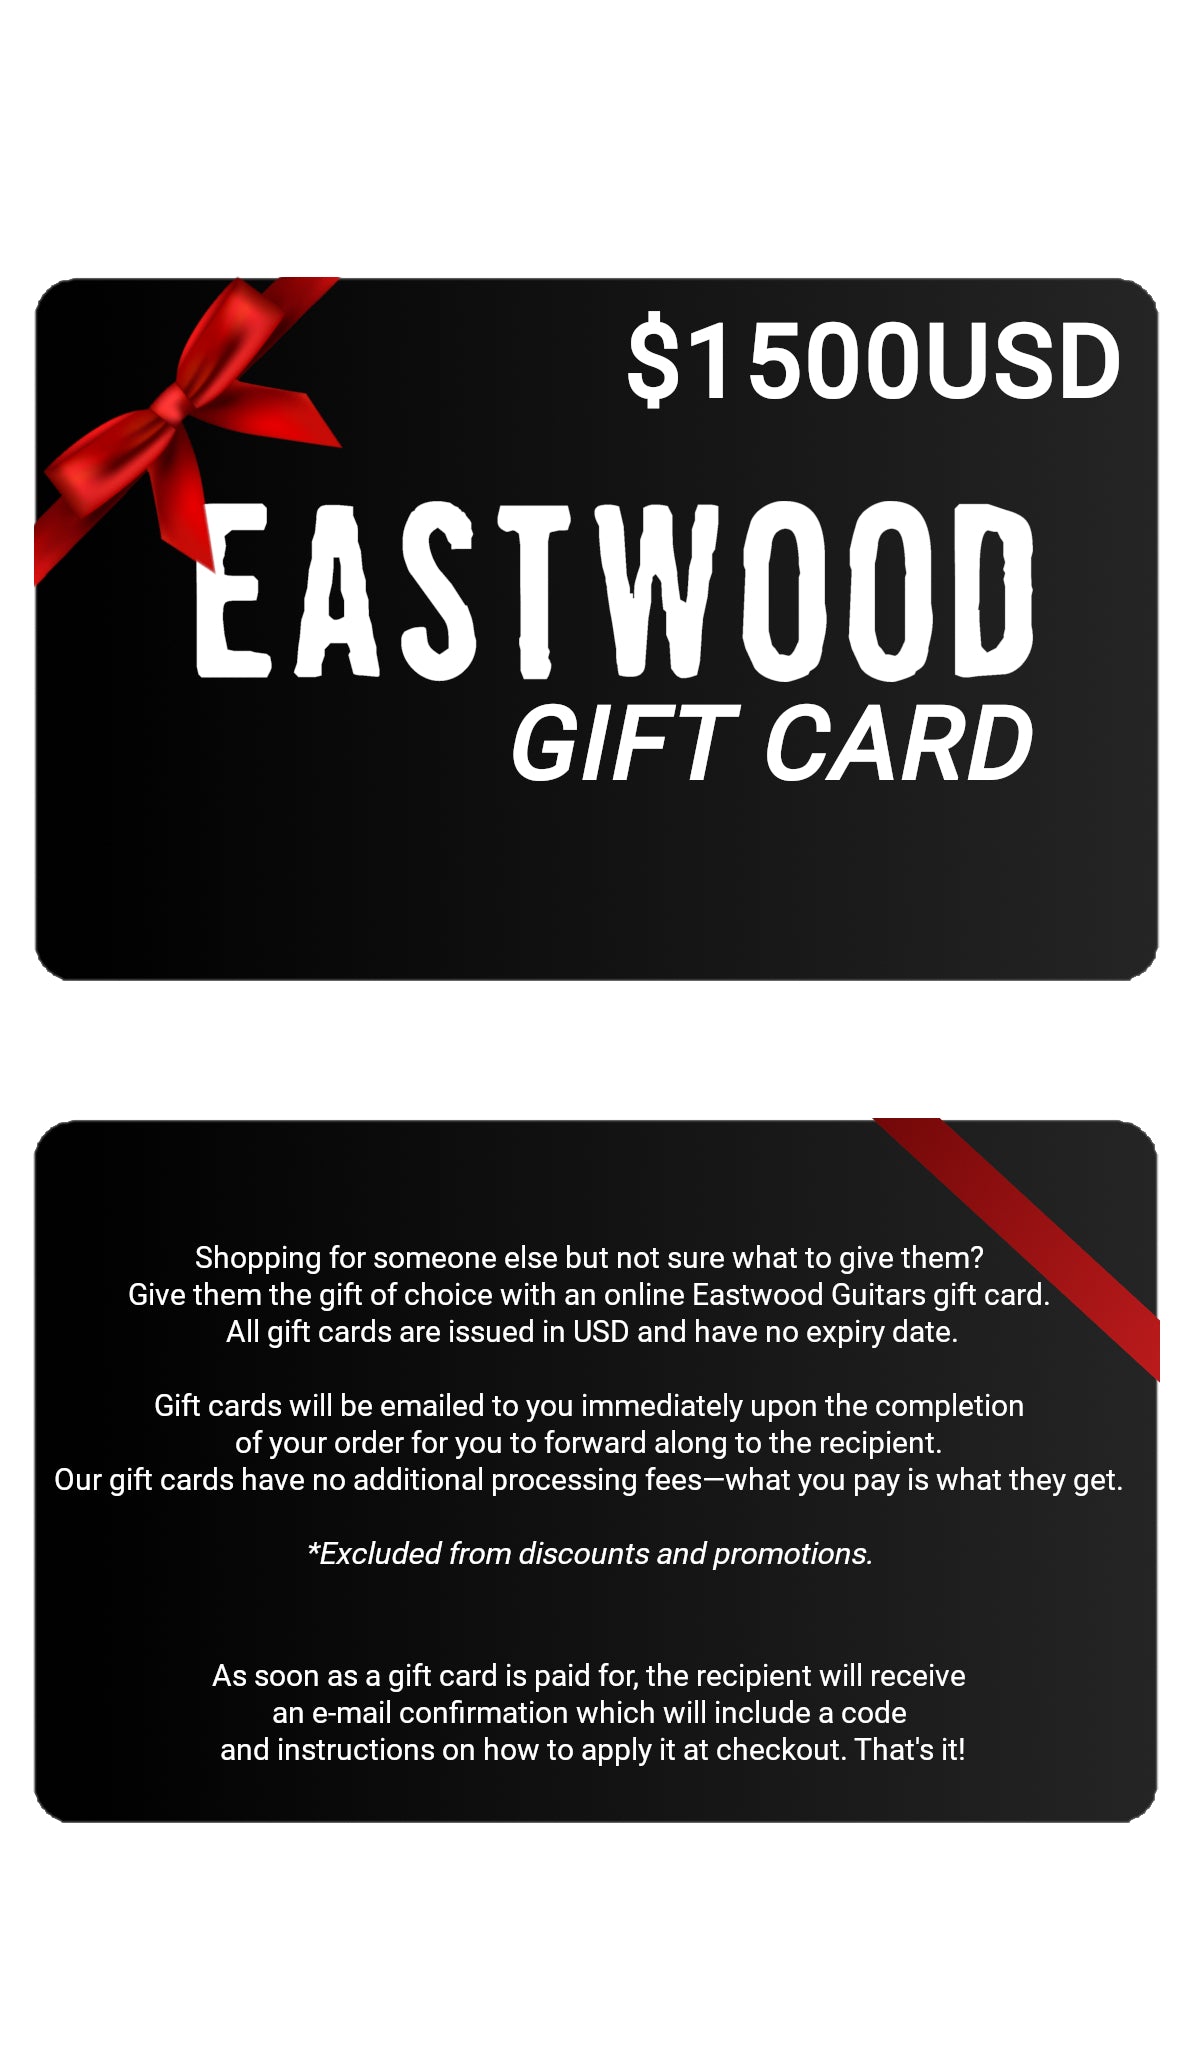 Eastwood Guitars Eastwood Gift Cards $1500